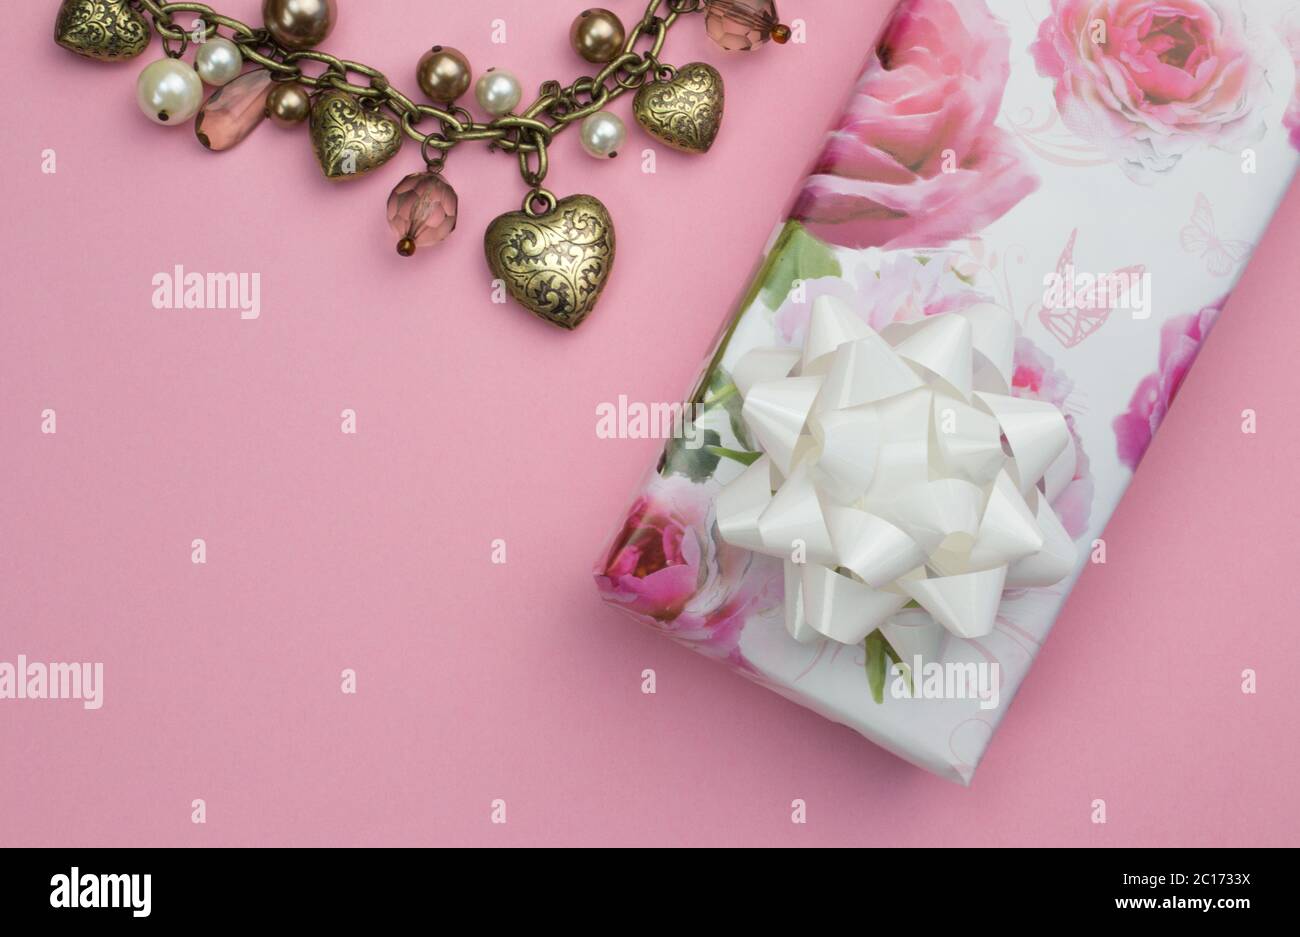 Background with gold heart and pearl necklace, wrapped rose gift wrapped present isolated on pink Stock Photo